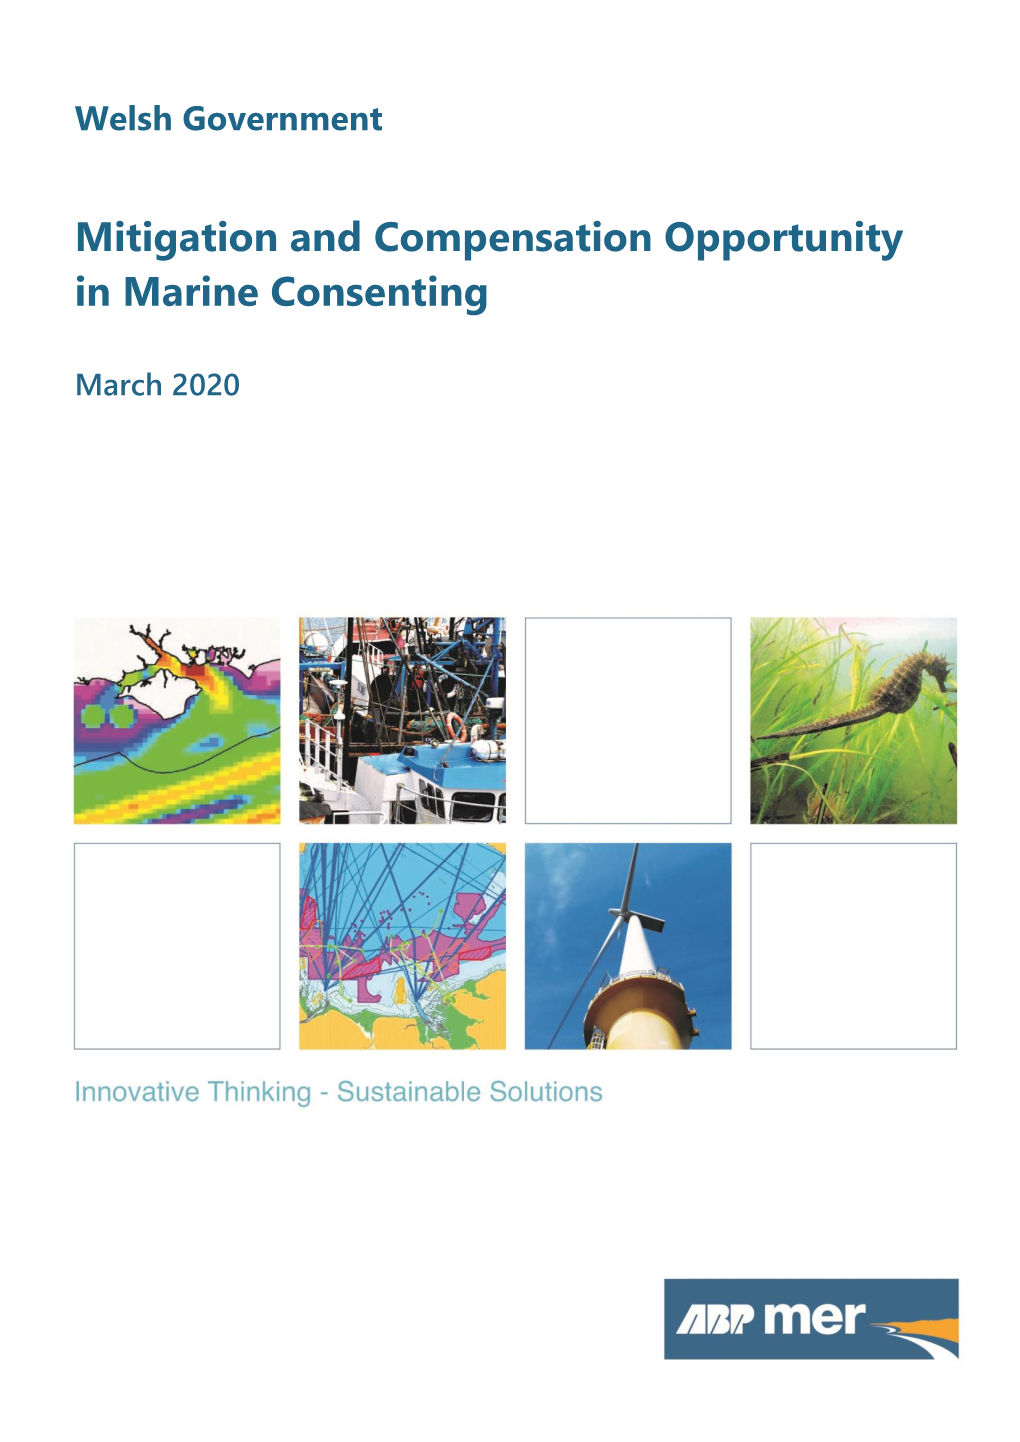 Mitigation and Compensation Opportunity in Marine Consenting